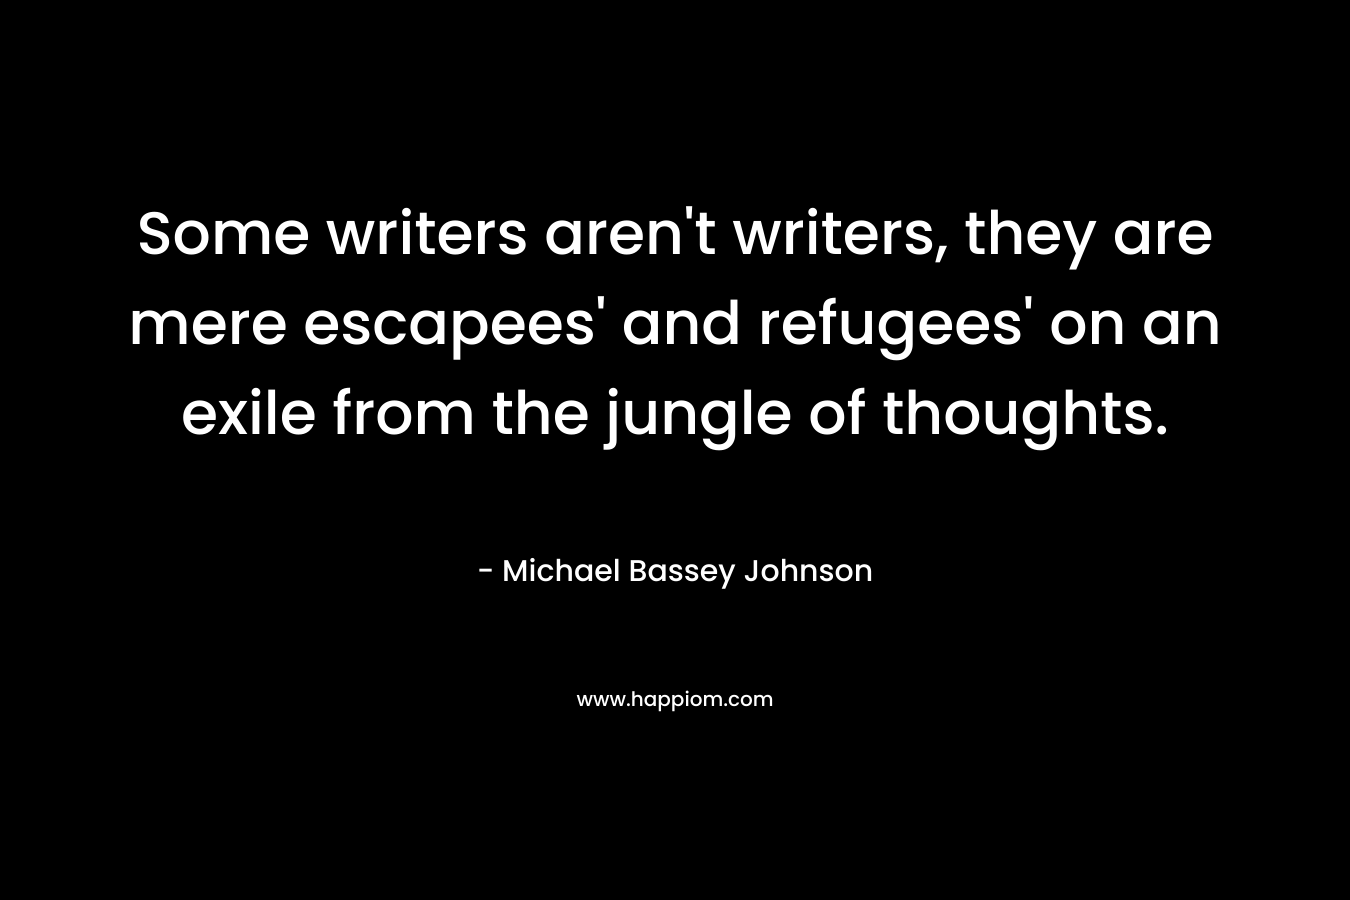 Some writers aren’t writers, they are mere escapees’ and refugees’ on an exile from the jungle of thoughts. – Michael Bassey Johnson